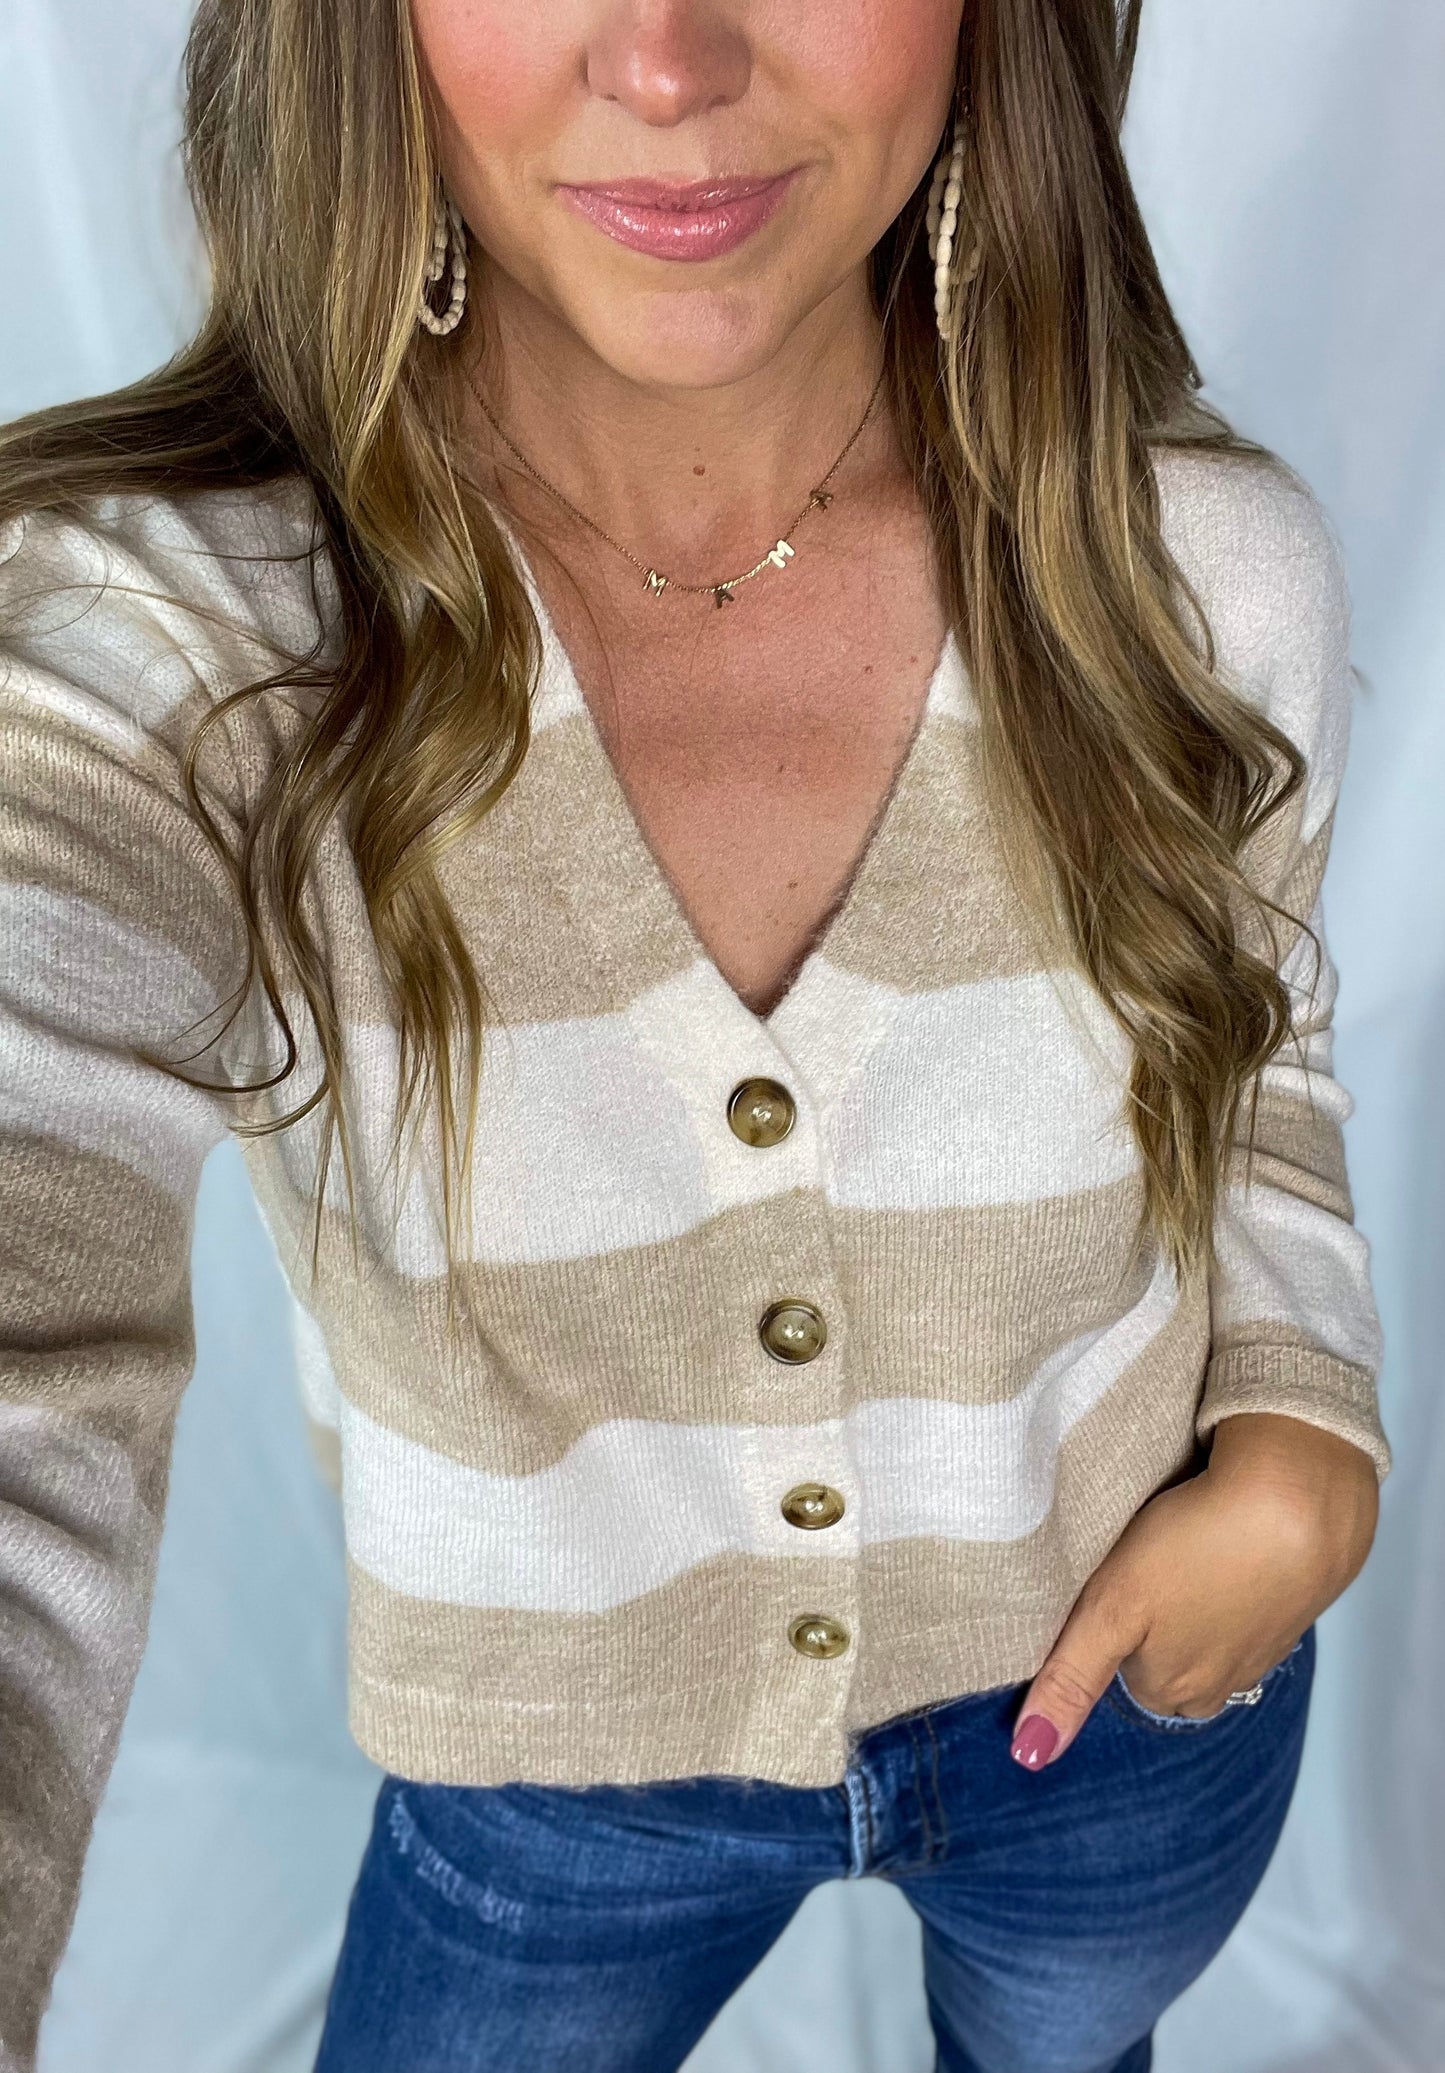 Best Day Ever Ivory & Taupe Striped Cardigan